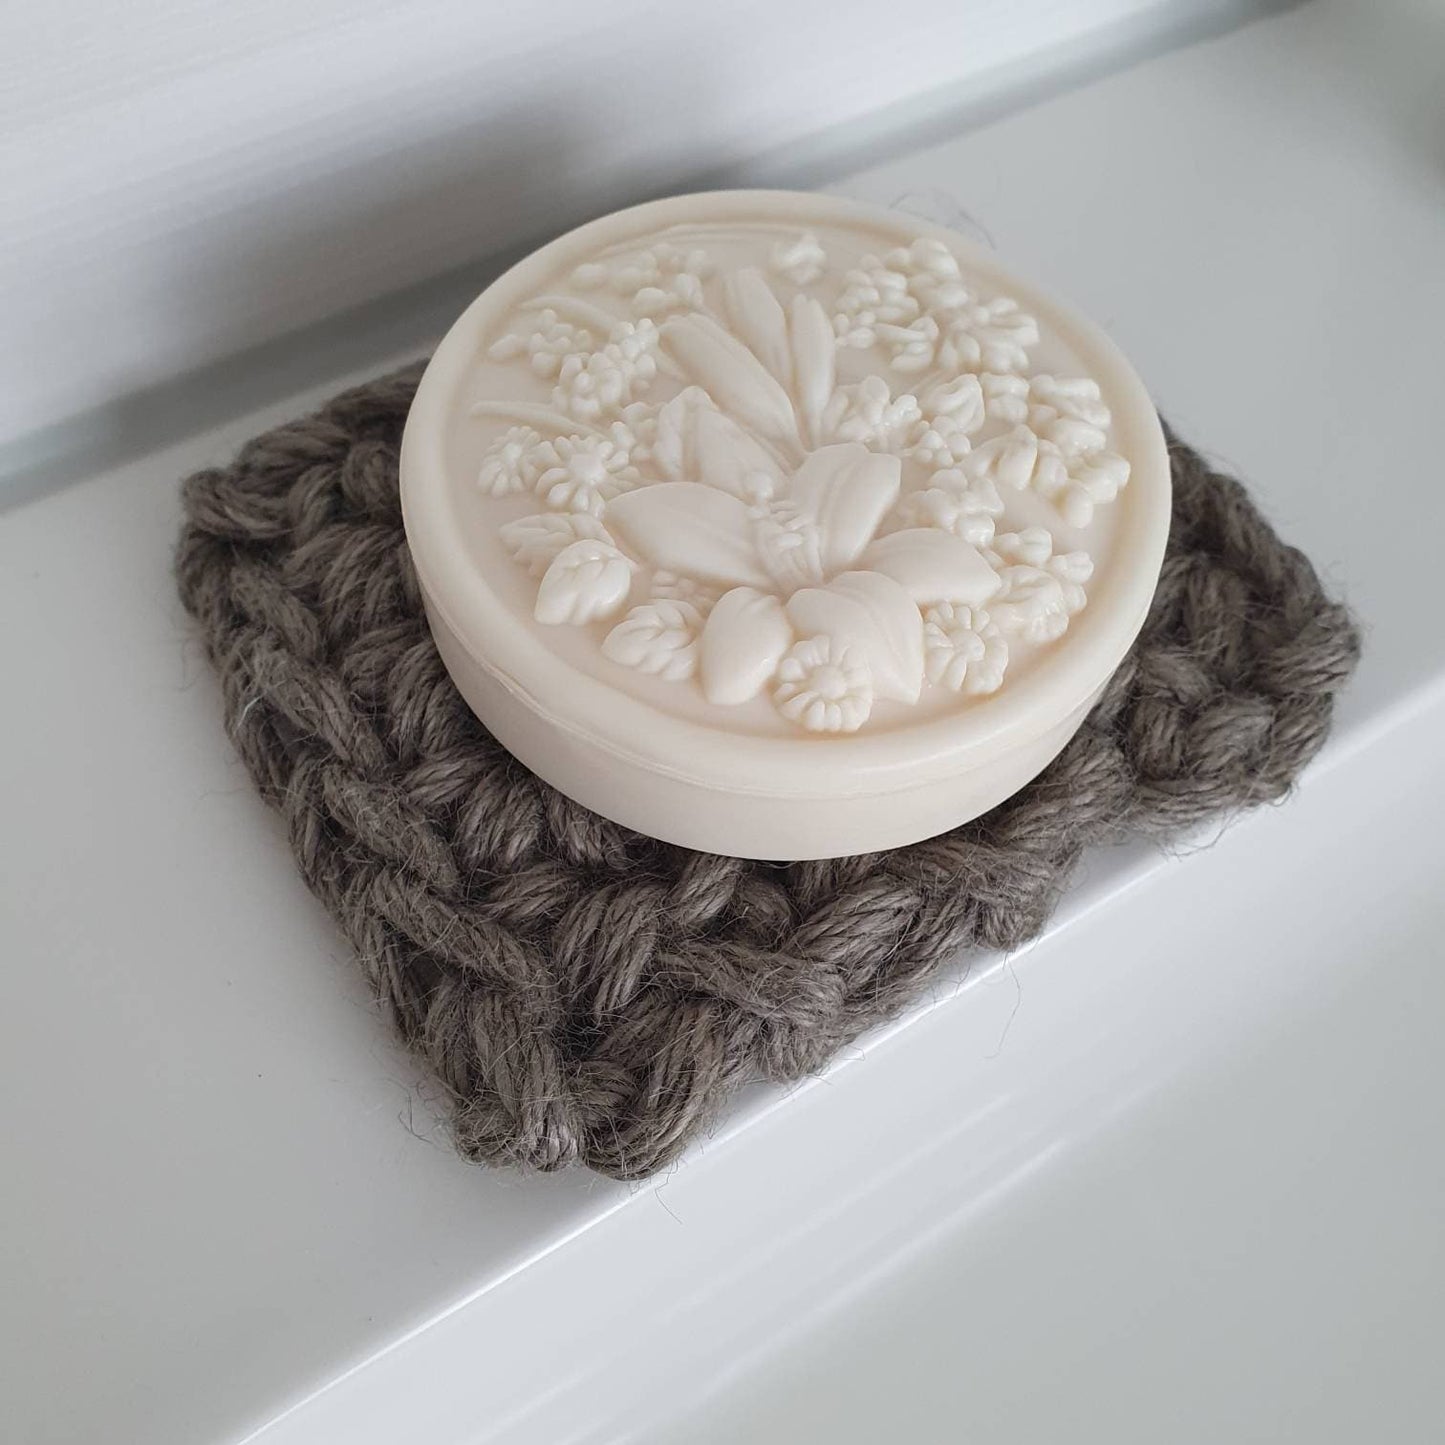 Soap base crocheted from 100% natural jute, robust durable and plastic-free